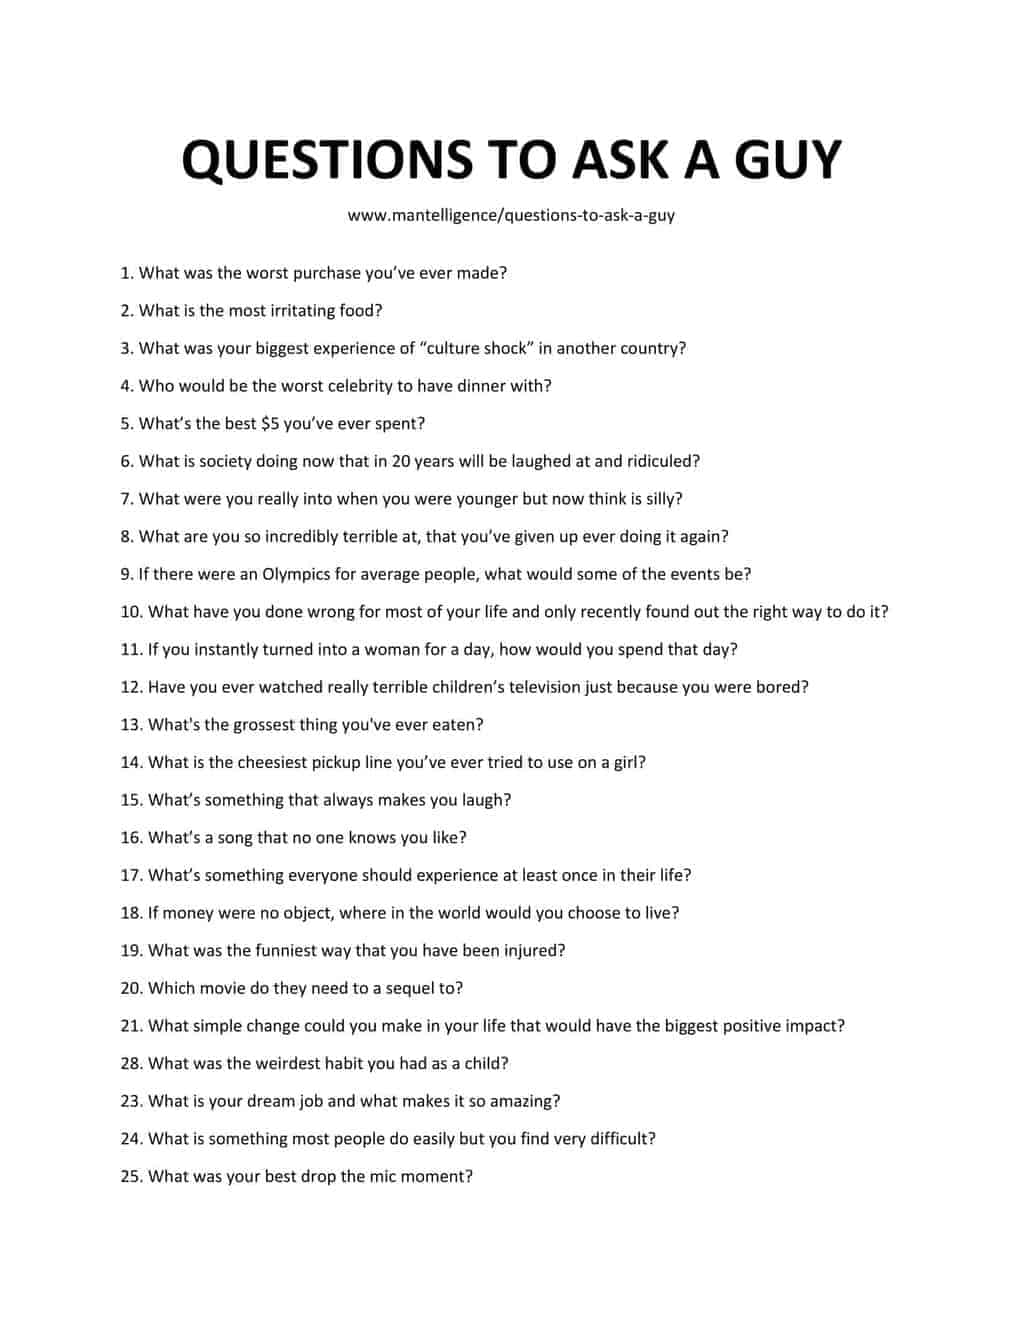 LIST OF QUESTIONS TO ASK A GUY 1 